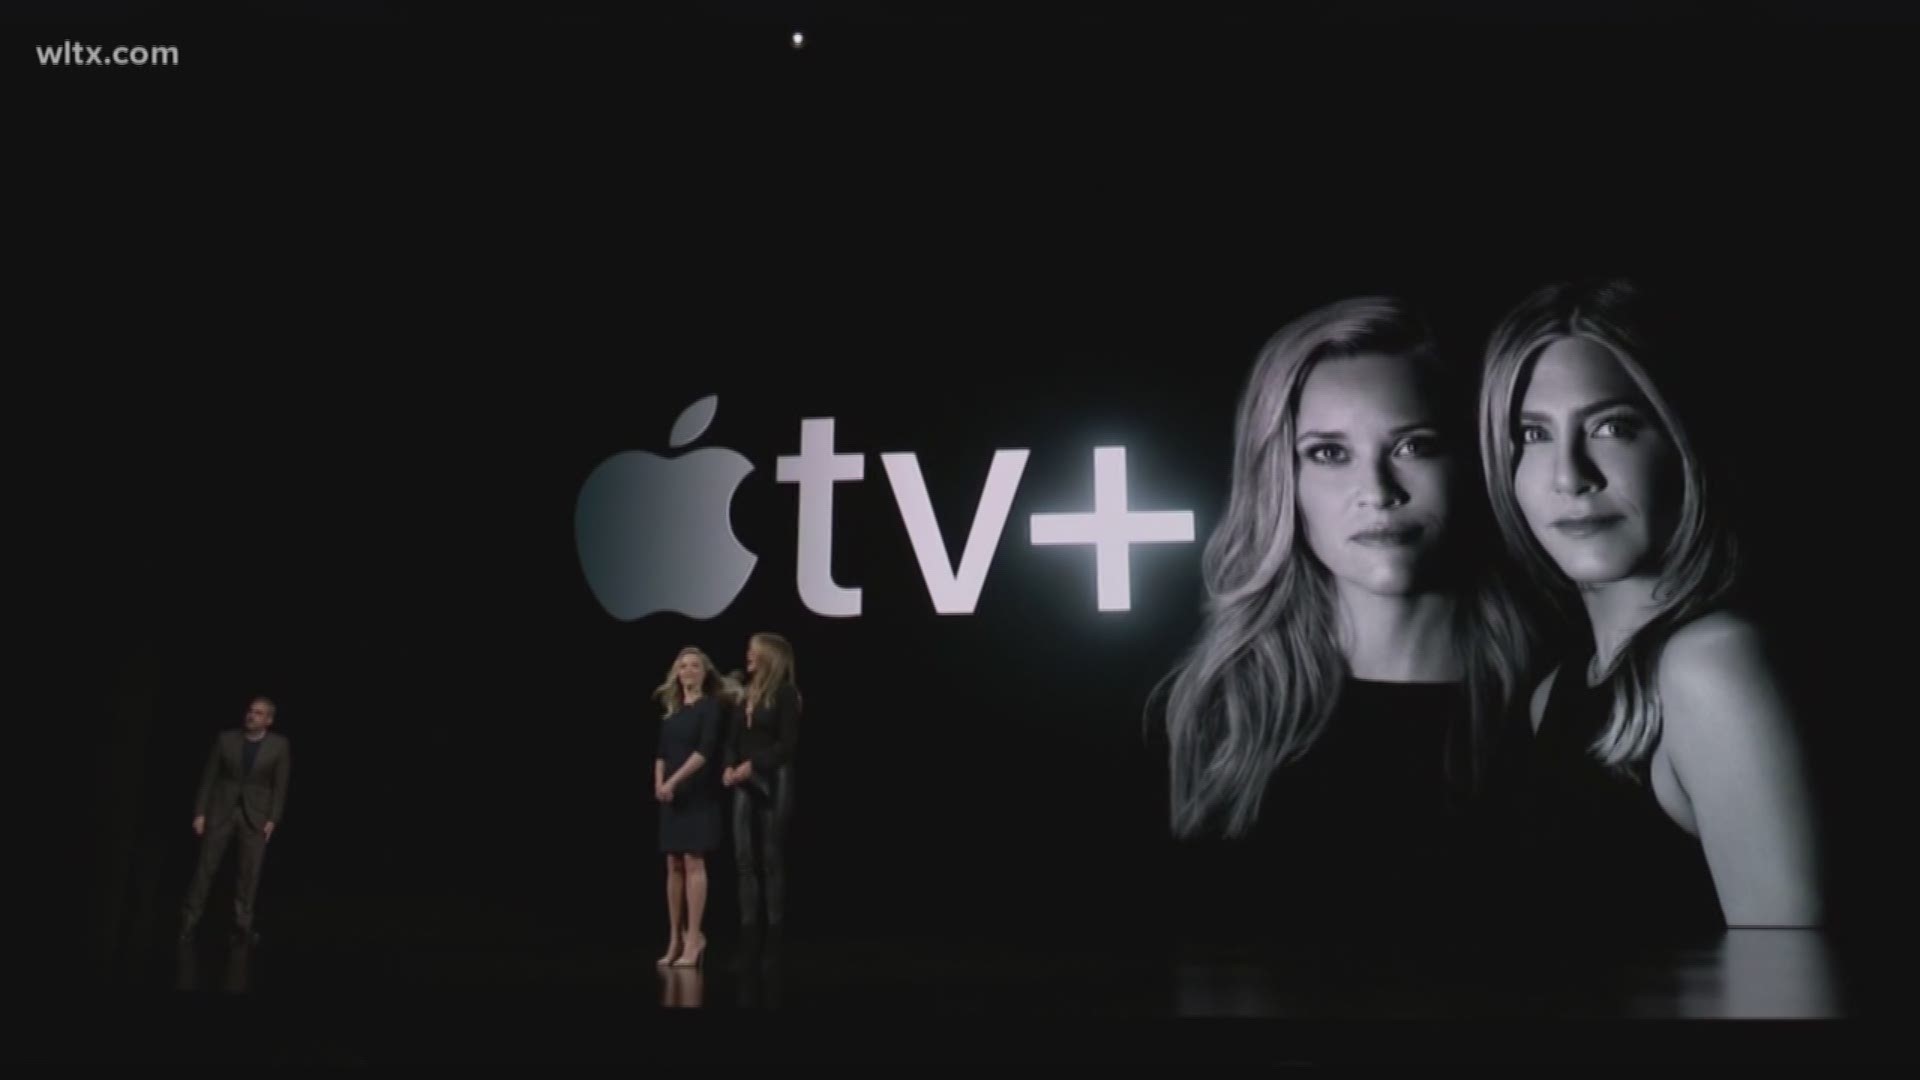 Apple's new video service is expected to have original TV shows and movies that reportedly cost it more than $1 billion.